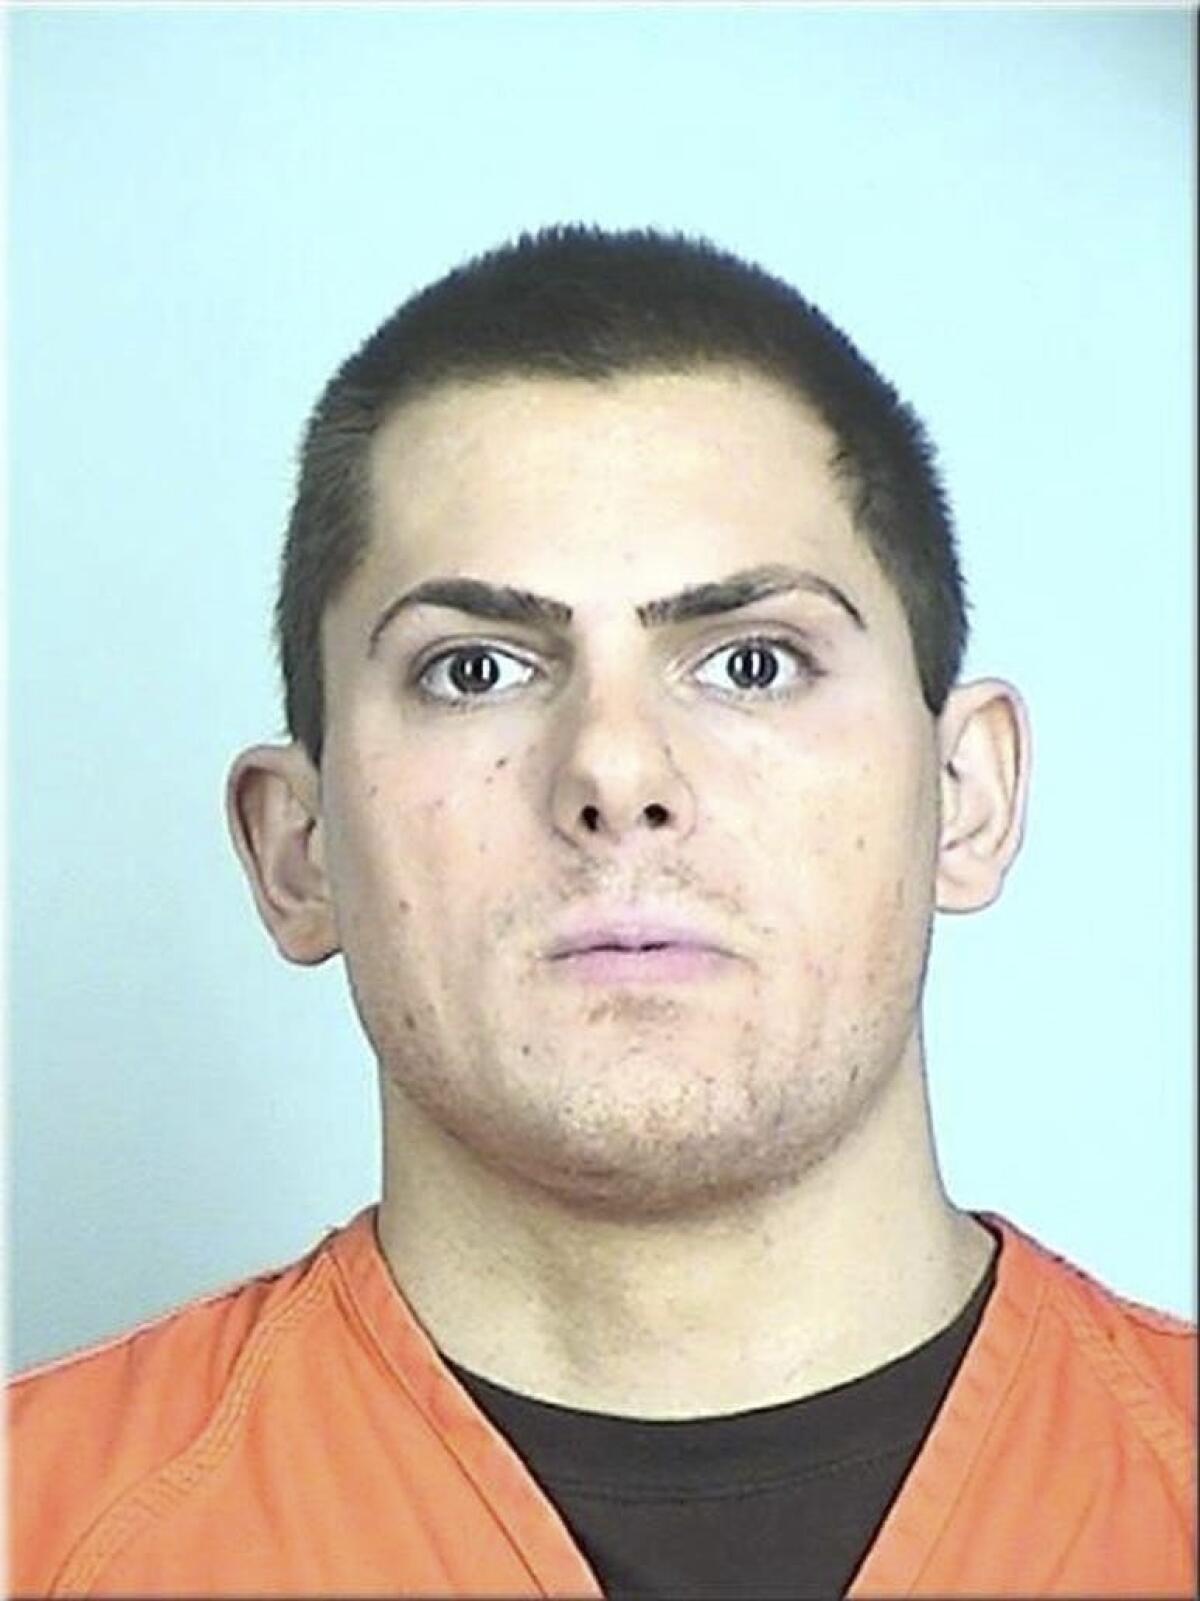 This booking photo released by Sherburne County Jail shows Anton Lazzaro. Lazzaro, a prominent Minnesota GOP donor who is charged with multiple counts of child sex trafficking is now being sued by an underage girl he allegedly groomed as a victim. The lawsuit filed Tuesday, Sept. 7, 2021, in U.S. District Court alleges Anton Lazzaro offered $1,000 in hush money to the girl and her parents to keep them quiet and asked them to sign a non-disclosure agreement. (Sherburne County Jail/Star Tribune via AP)